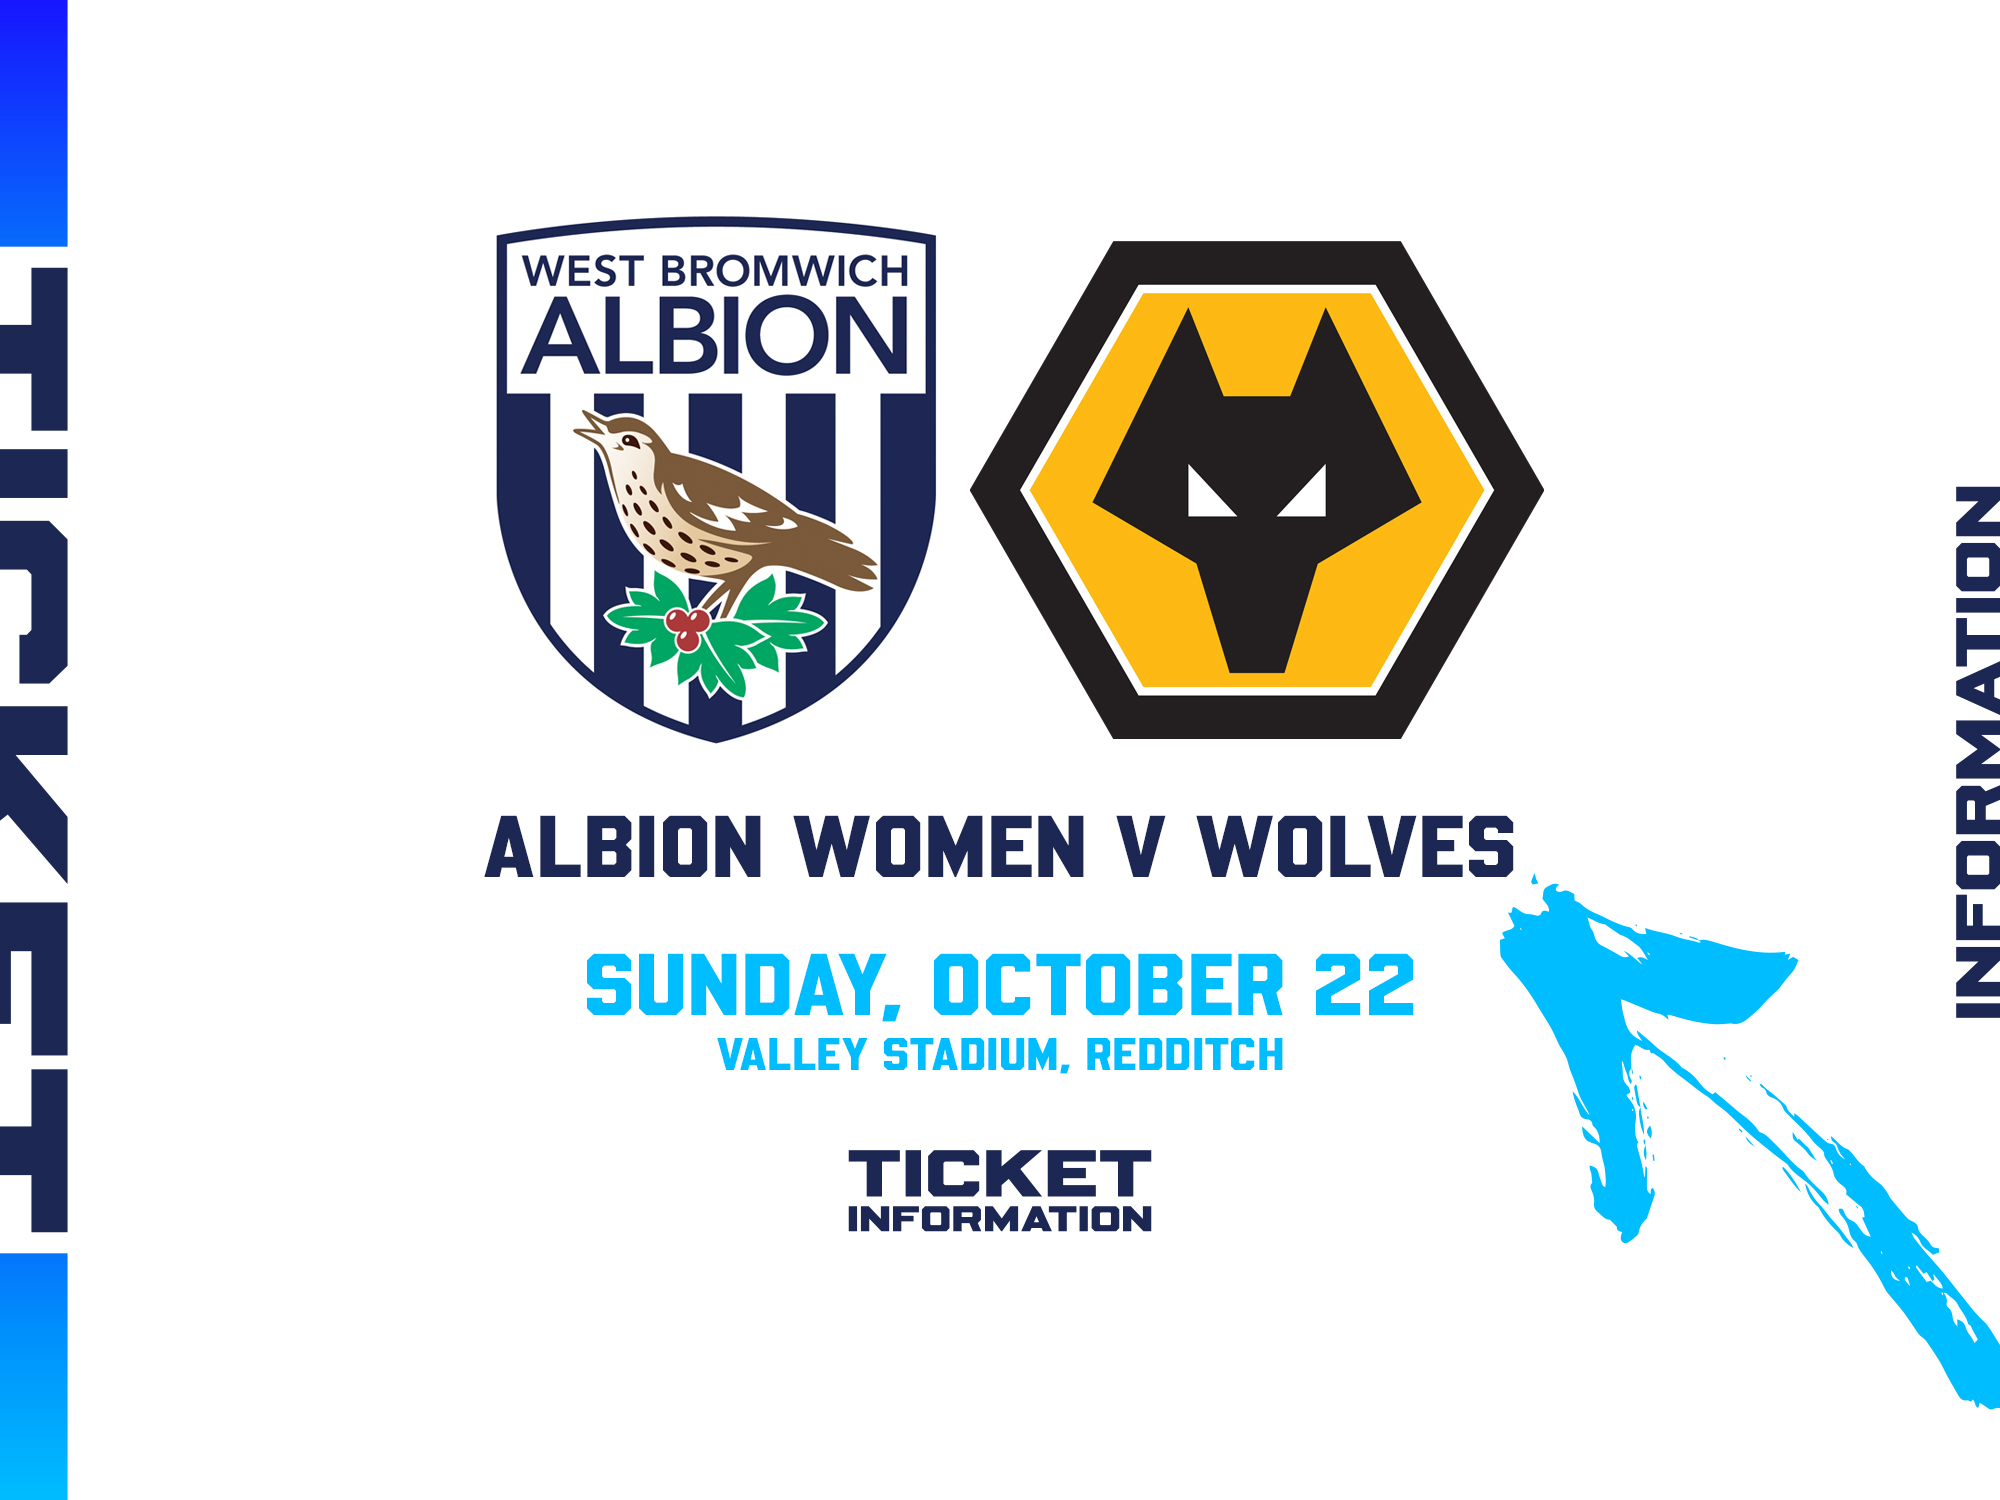 A ticket graphic displaying information for Albion Women's game against Wolves